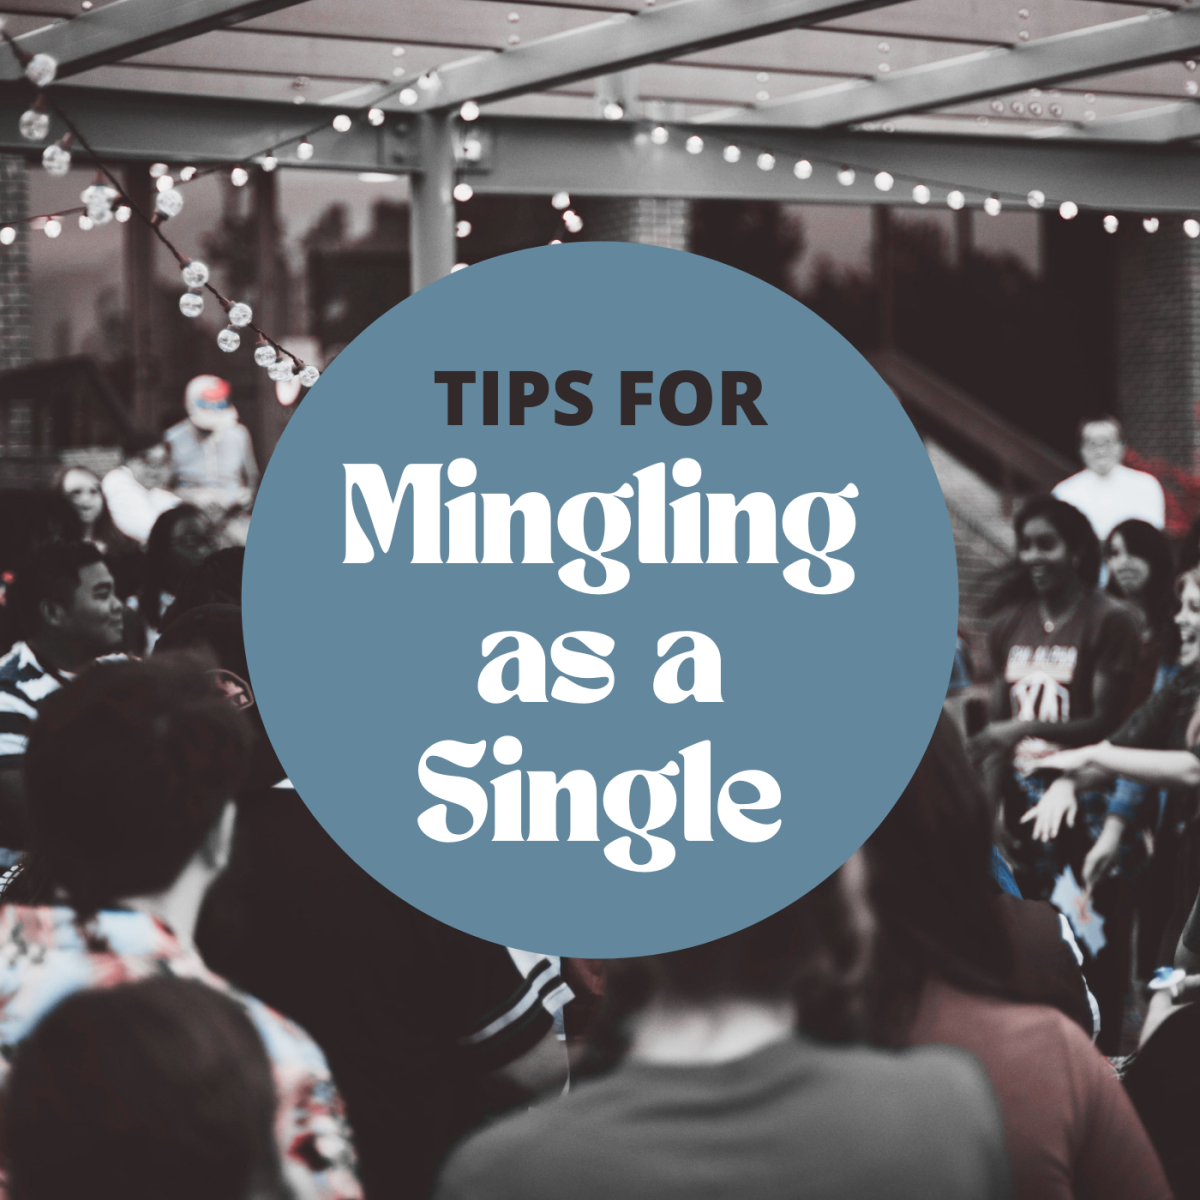 Mingling as a single person is an artform. Get some advice on how to do it right!